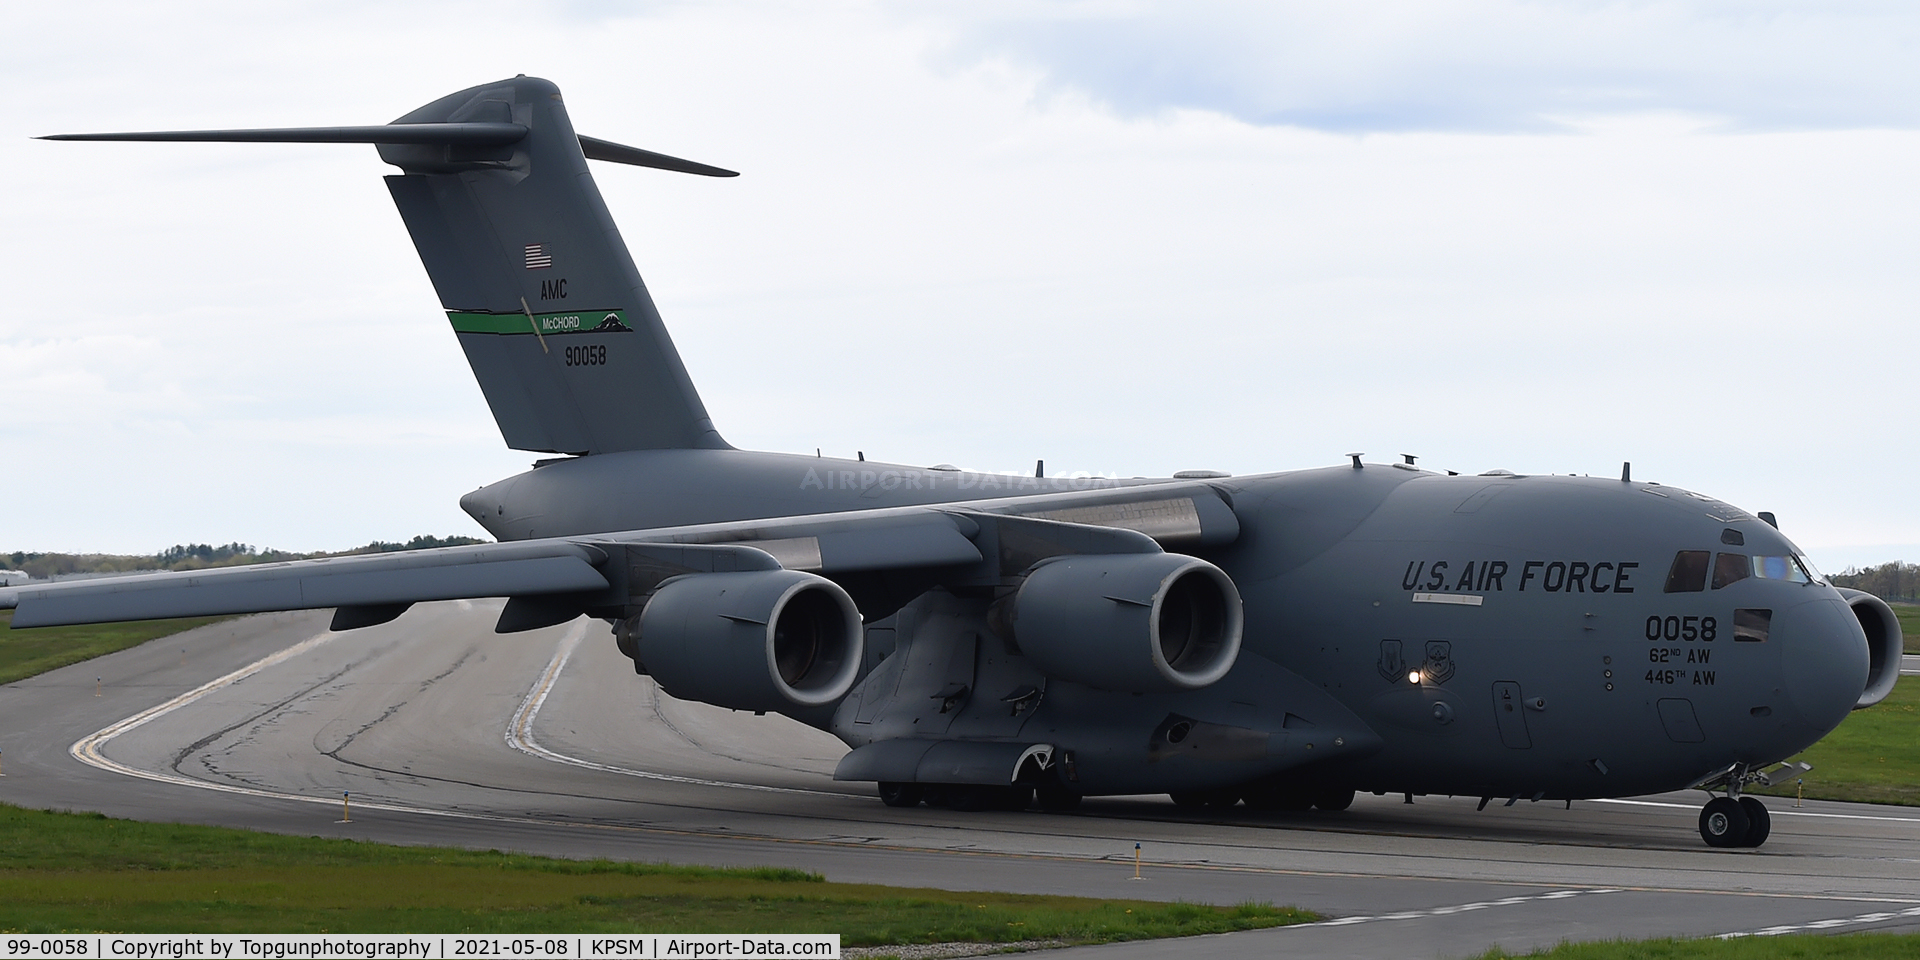 99-0058, 1999 Boeing C-17A Globemaster III C/N 50062/P-58, REACH998, now with the 62nd AW at McChord AFB.